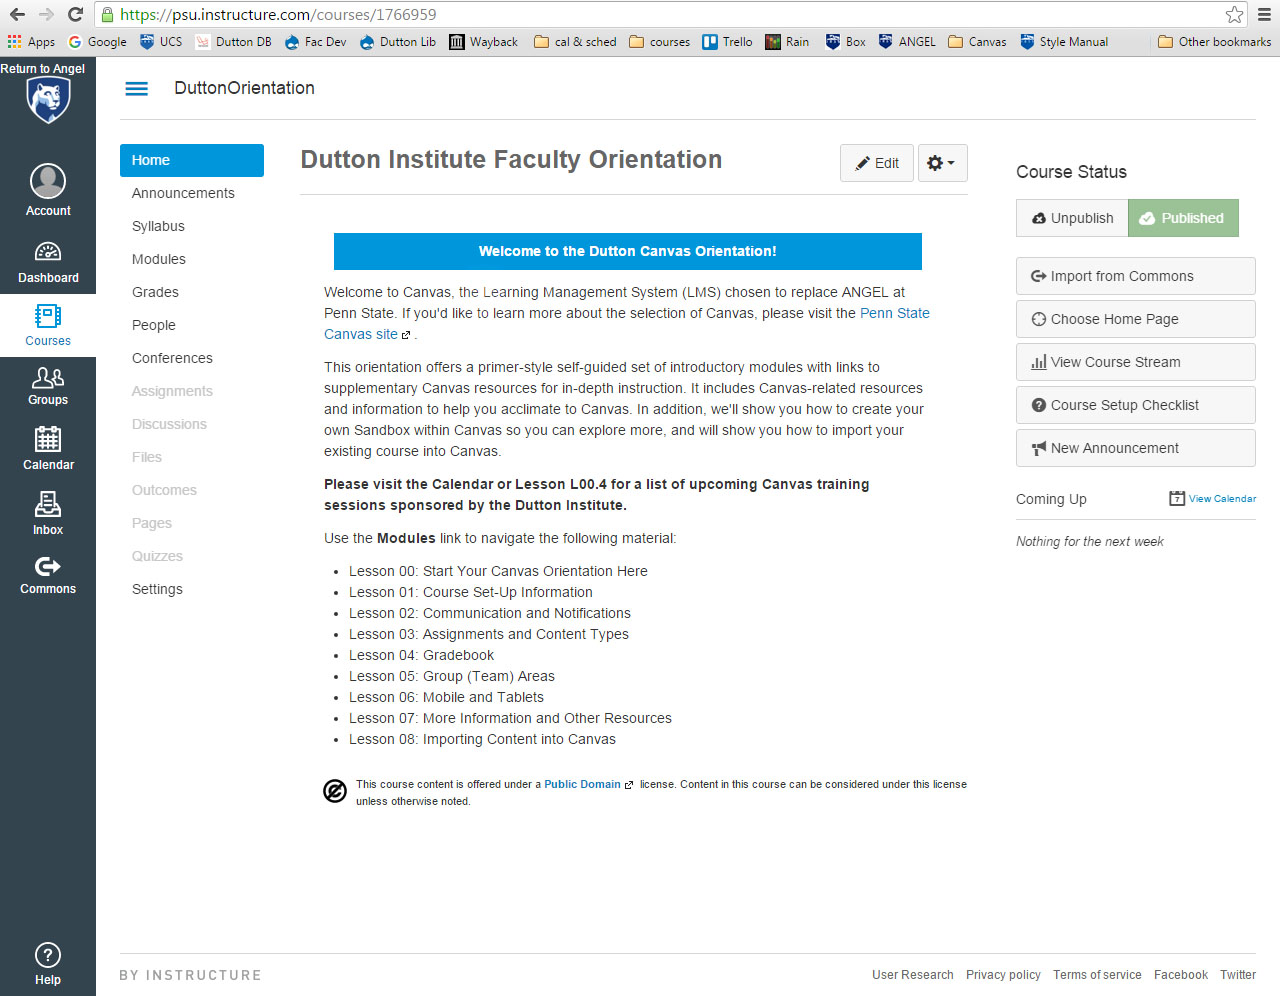 Screen shot of the Dutton Tutorial's home page